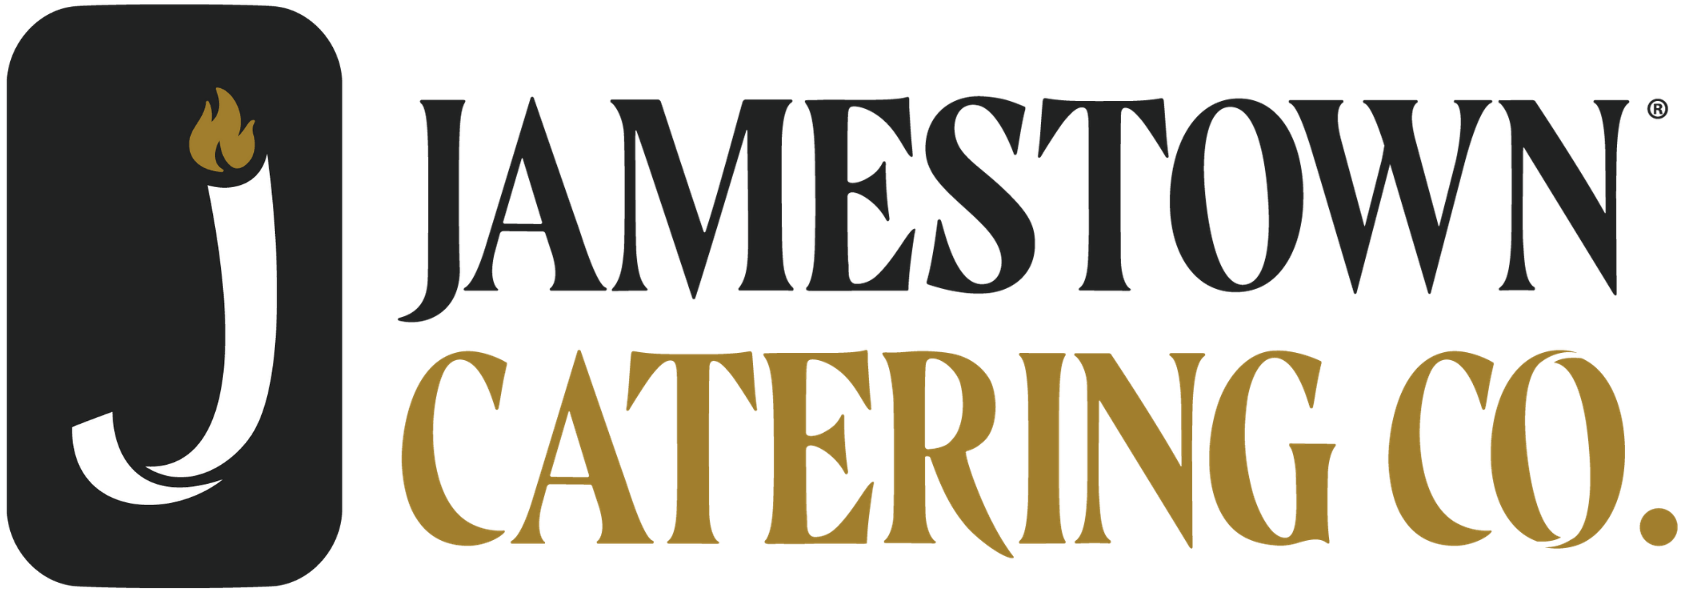 Jamestown Catering Home